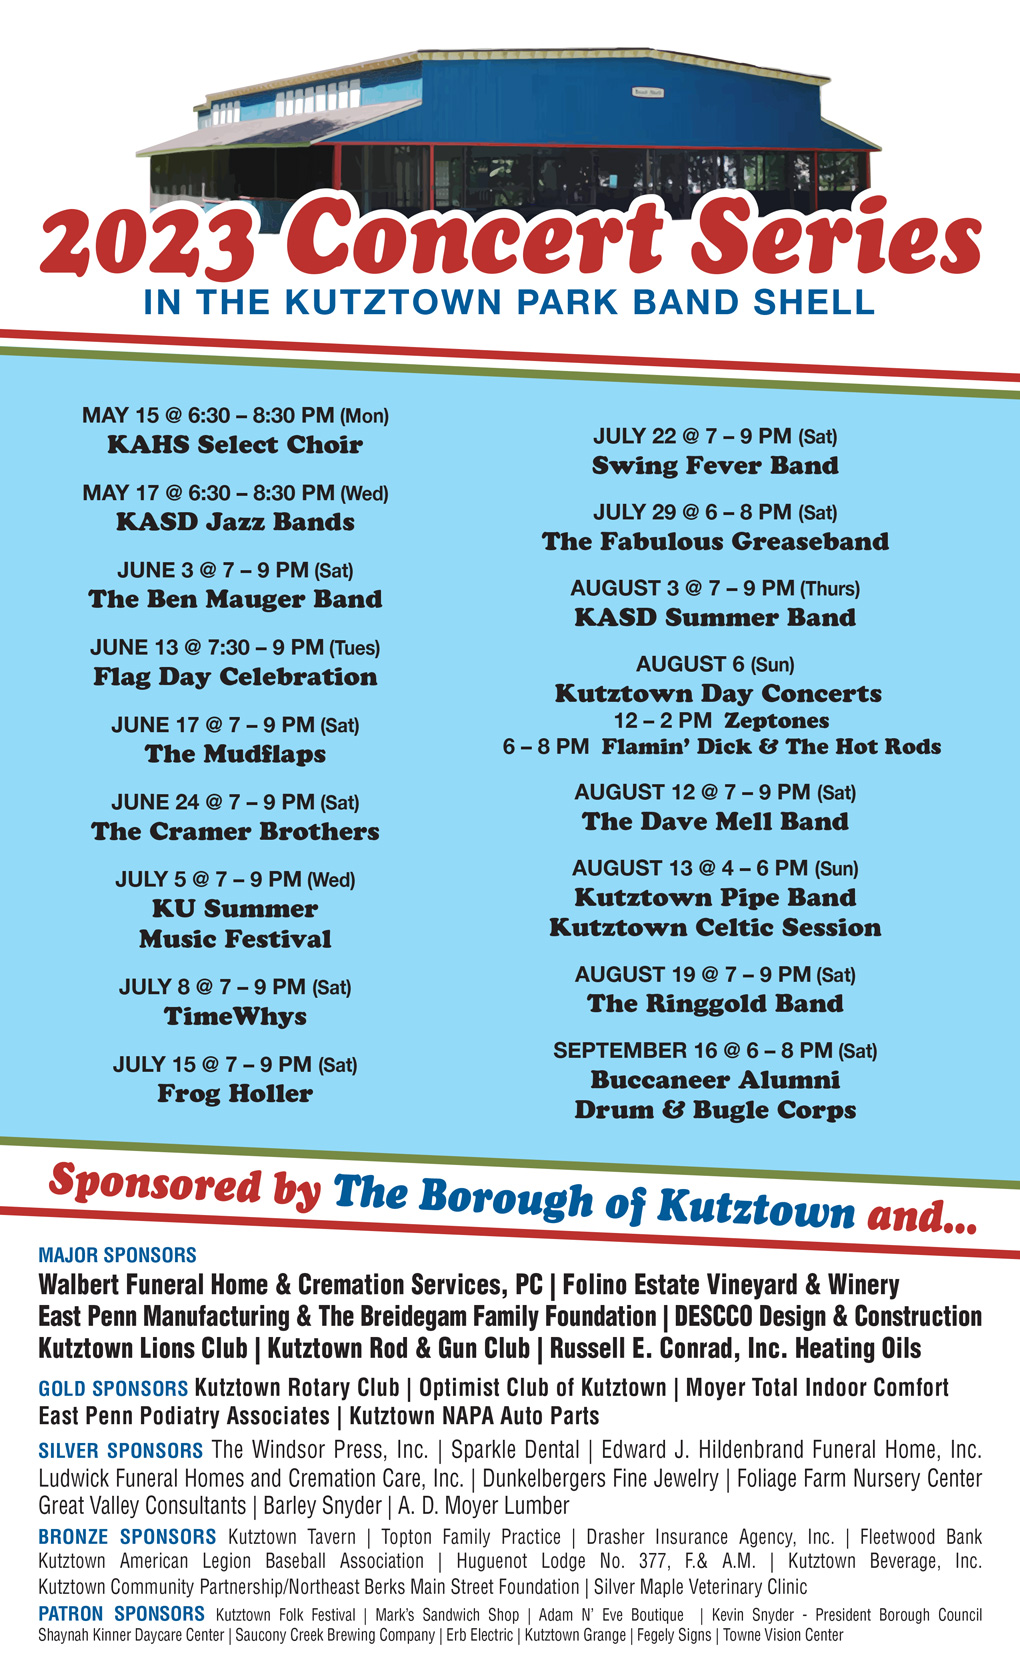 2023 Concert Series in the Kutztown Park Band Shell. The schedule is as follows: Monday, May 15 from 6:30 to 8:30 pm is KAHS Select Choir; Wednesday, May 17 from 6:30 to 8:30 pm is KASD Jazz Bands; Saturday, June 3 at 7 to 9 pm is The Ben Mauger Band; Tuesday, June 13 at 7:30 to 9 pm is Flag Day Celebration; Saturday, June 17 from 7 to 9 pm is The Mudflaps; Saturday, June 24 at 7 to 9 pm is The Cramer Brothers; Wednesday, July 5 at 7 to 9 pm is the KU Summer Music Festival; Saturday, July 8 at 7 to 9 pm is TimeWhys; Saturday, July 15 at 7 to 9 pm is Frog Holler; Saturday, July 22 at 7 to 9 pm is Swing Fever Band; Saturday, July 29 at 6 to 8 pm is The Fabulous Greaseband; Thursday, August 3 at 7 to 9 pm is KASD Summer Band; Sunday, August 6 are Kutztown Day Concerts, including the Zeptones from 12 to 2 pm, and Flamin’ Dick and the Hot Rods from 6 to 8 pm; Saturday, August 12 at 7 to 9 pm is The Dave Mell Band; Sunday, August 13 at 4 to 6 pm is Kutztown Pipe Band, Kutztown Celtic Session; Saturday, August 19 at 7 to 9 pm is The Ringgold Band; and Saturday, September 16 at 6 to 8 pm is Buccaneer Alumni Drum & Bugle Corps. 